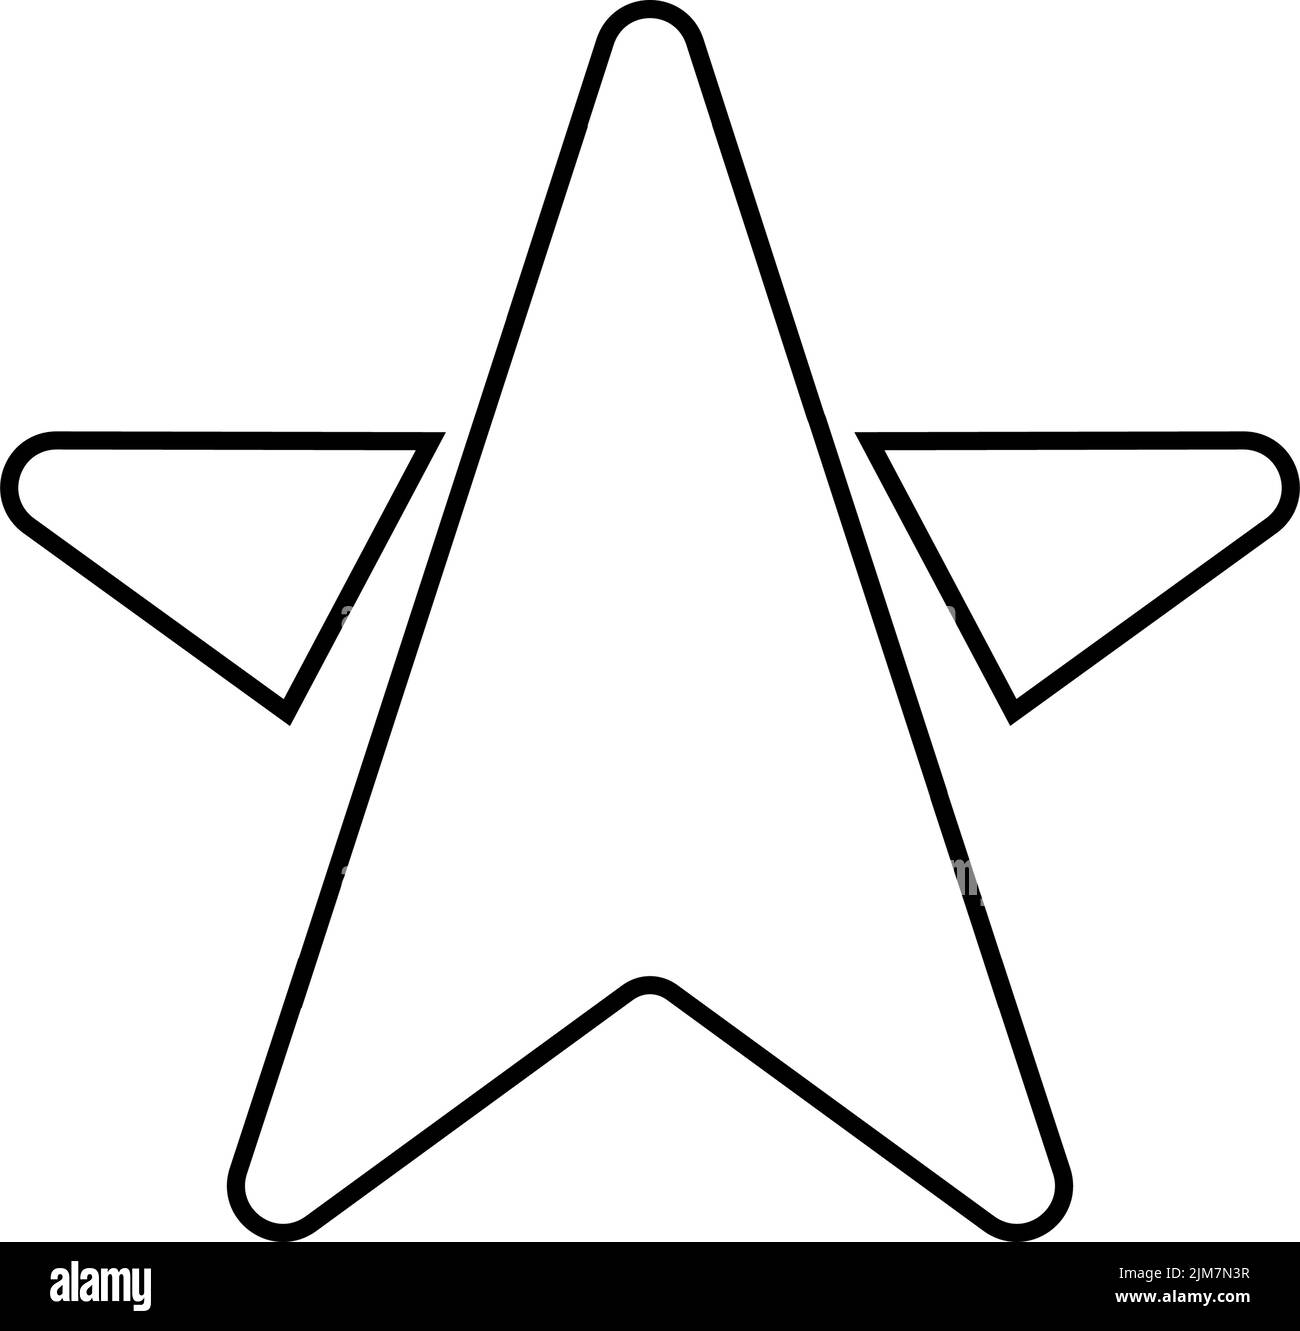 The monochrome star sign made of triangular shapes with white background Stock Vector